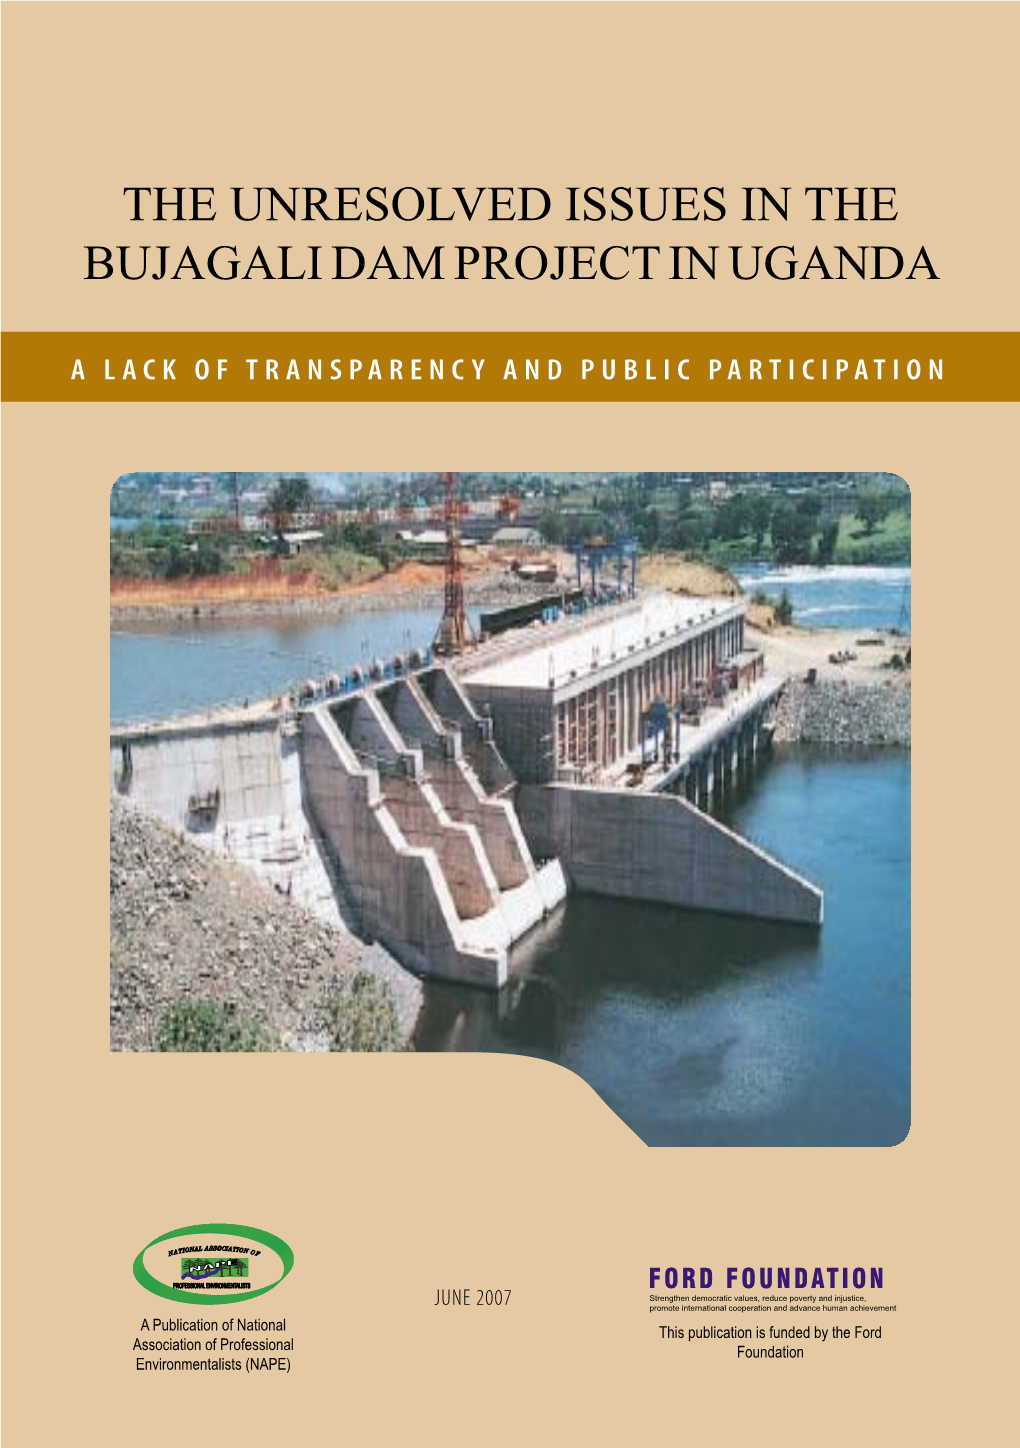 The Unresolved Issues in the Bujagali Dam Project in Uganda